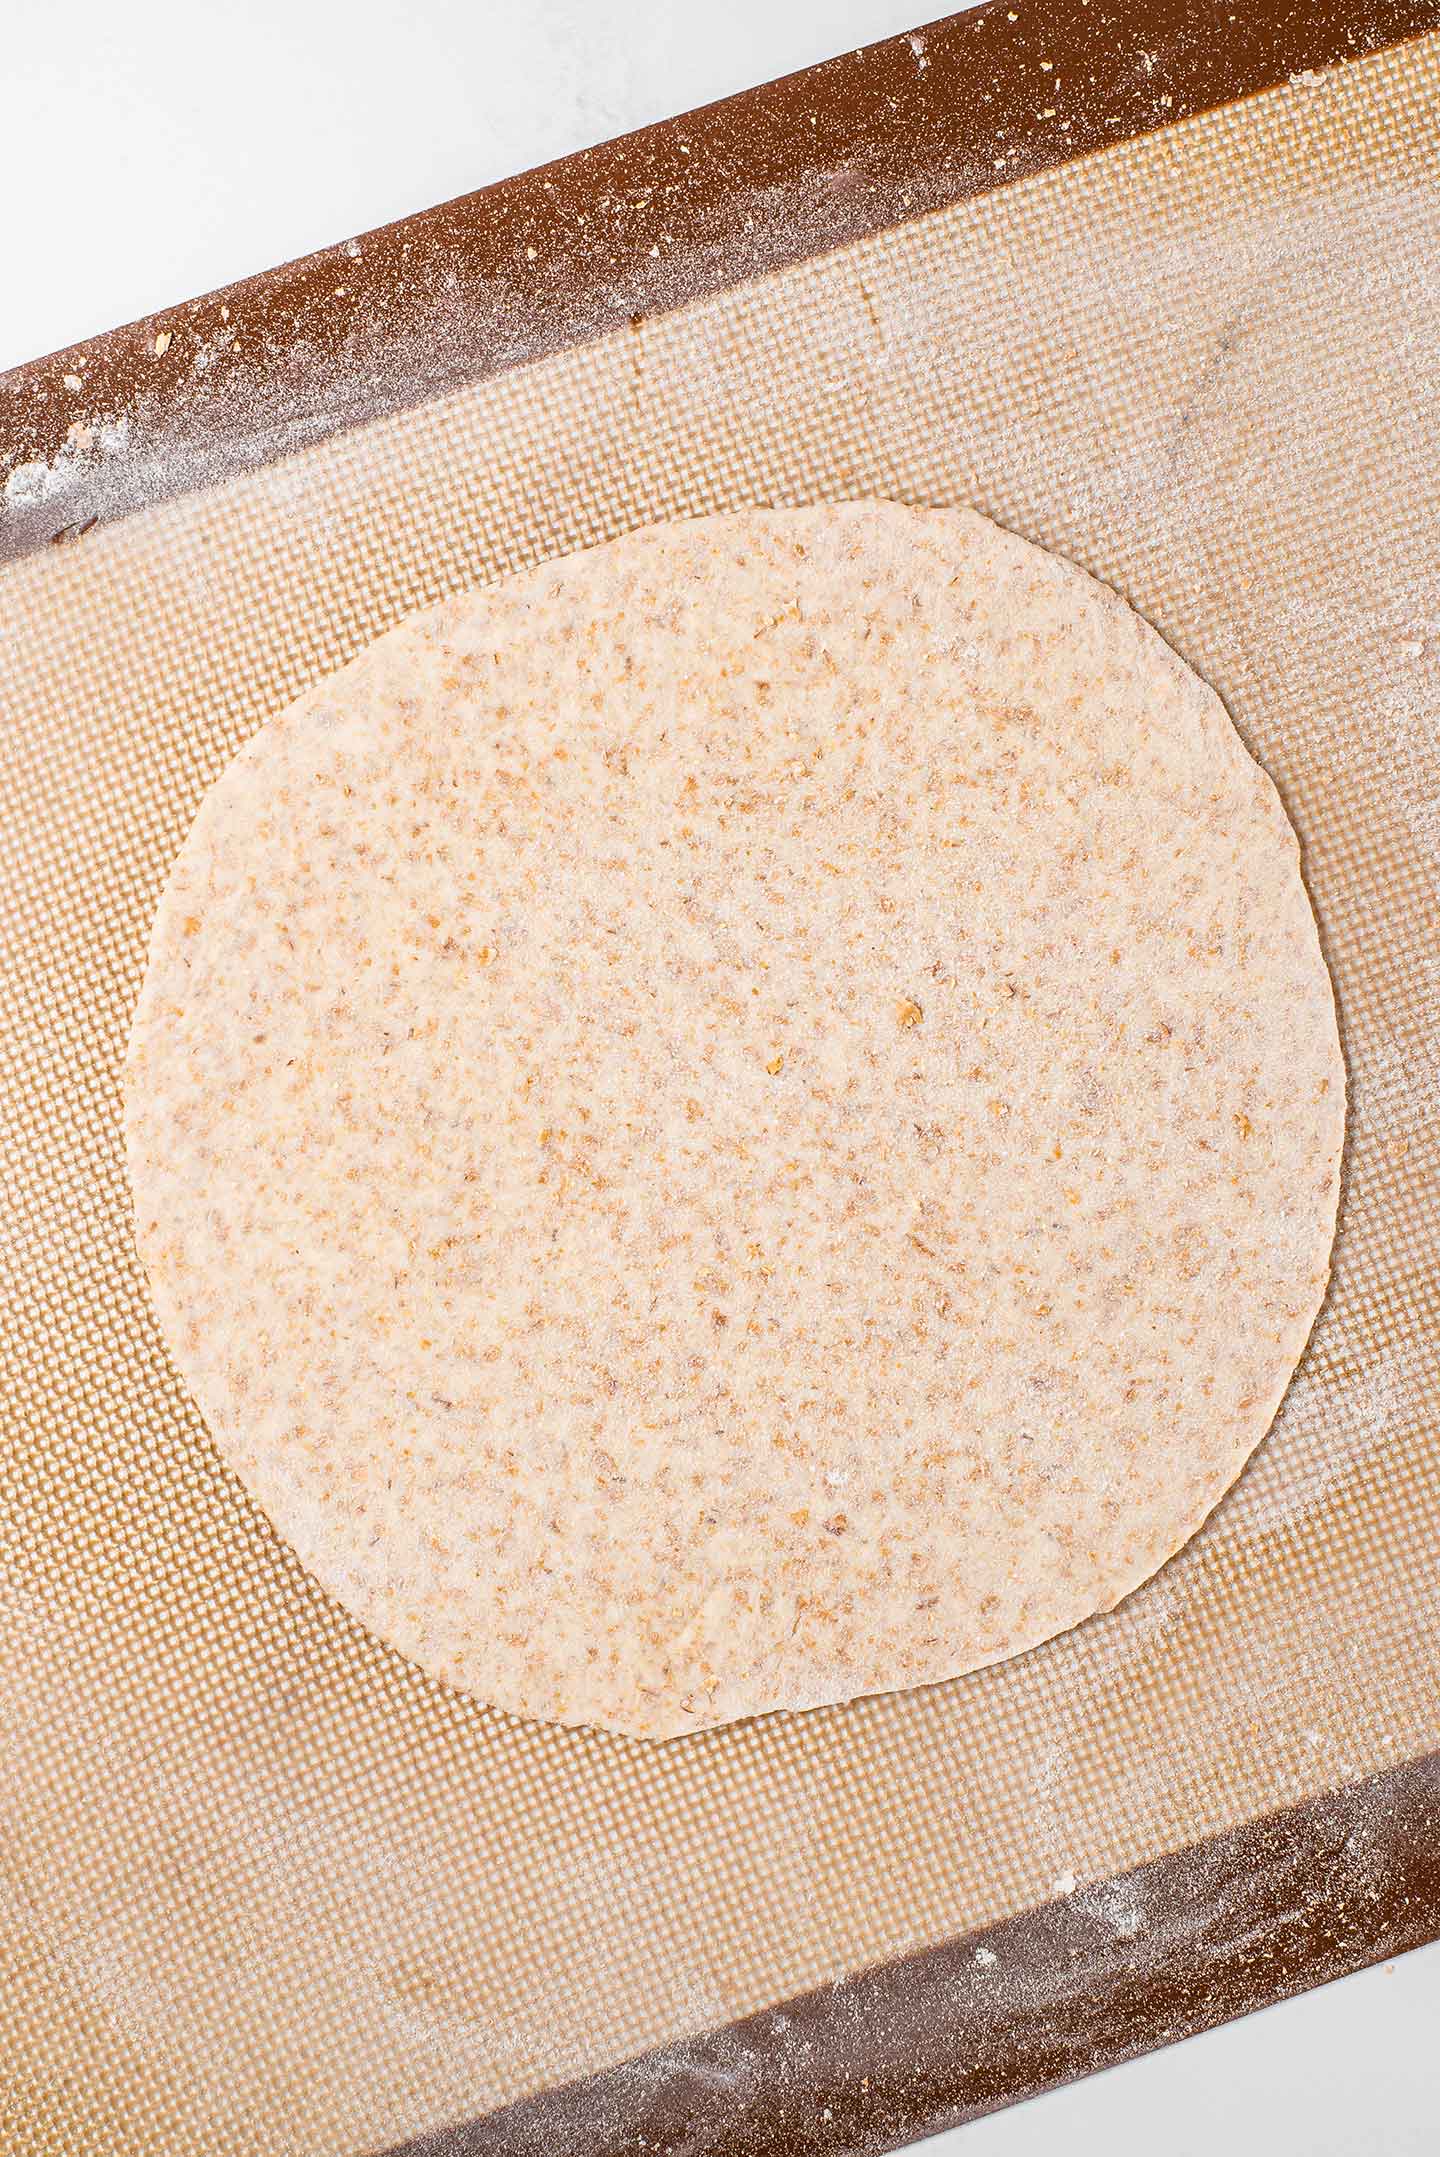 Top down view of roti dough rolled into the thin circular shape before being cooked.